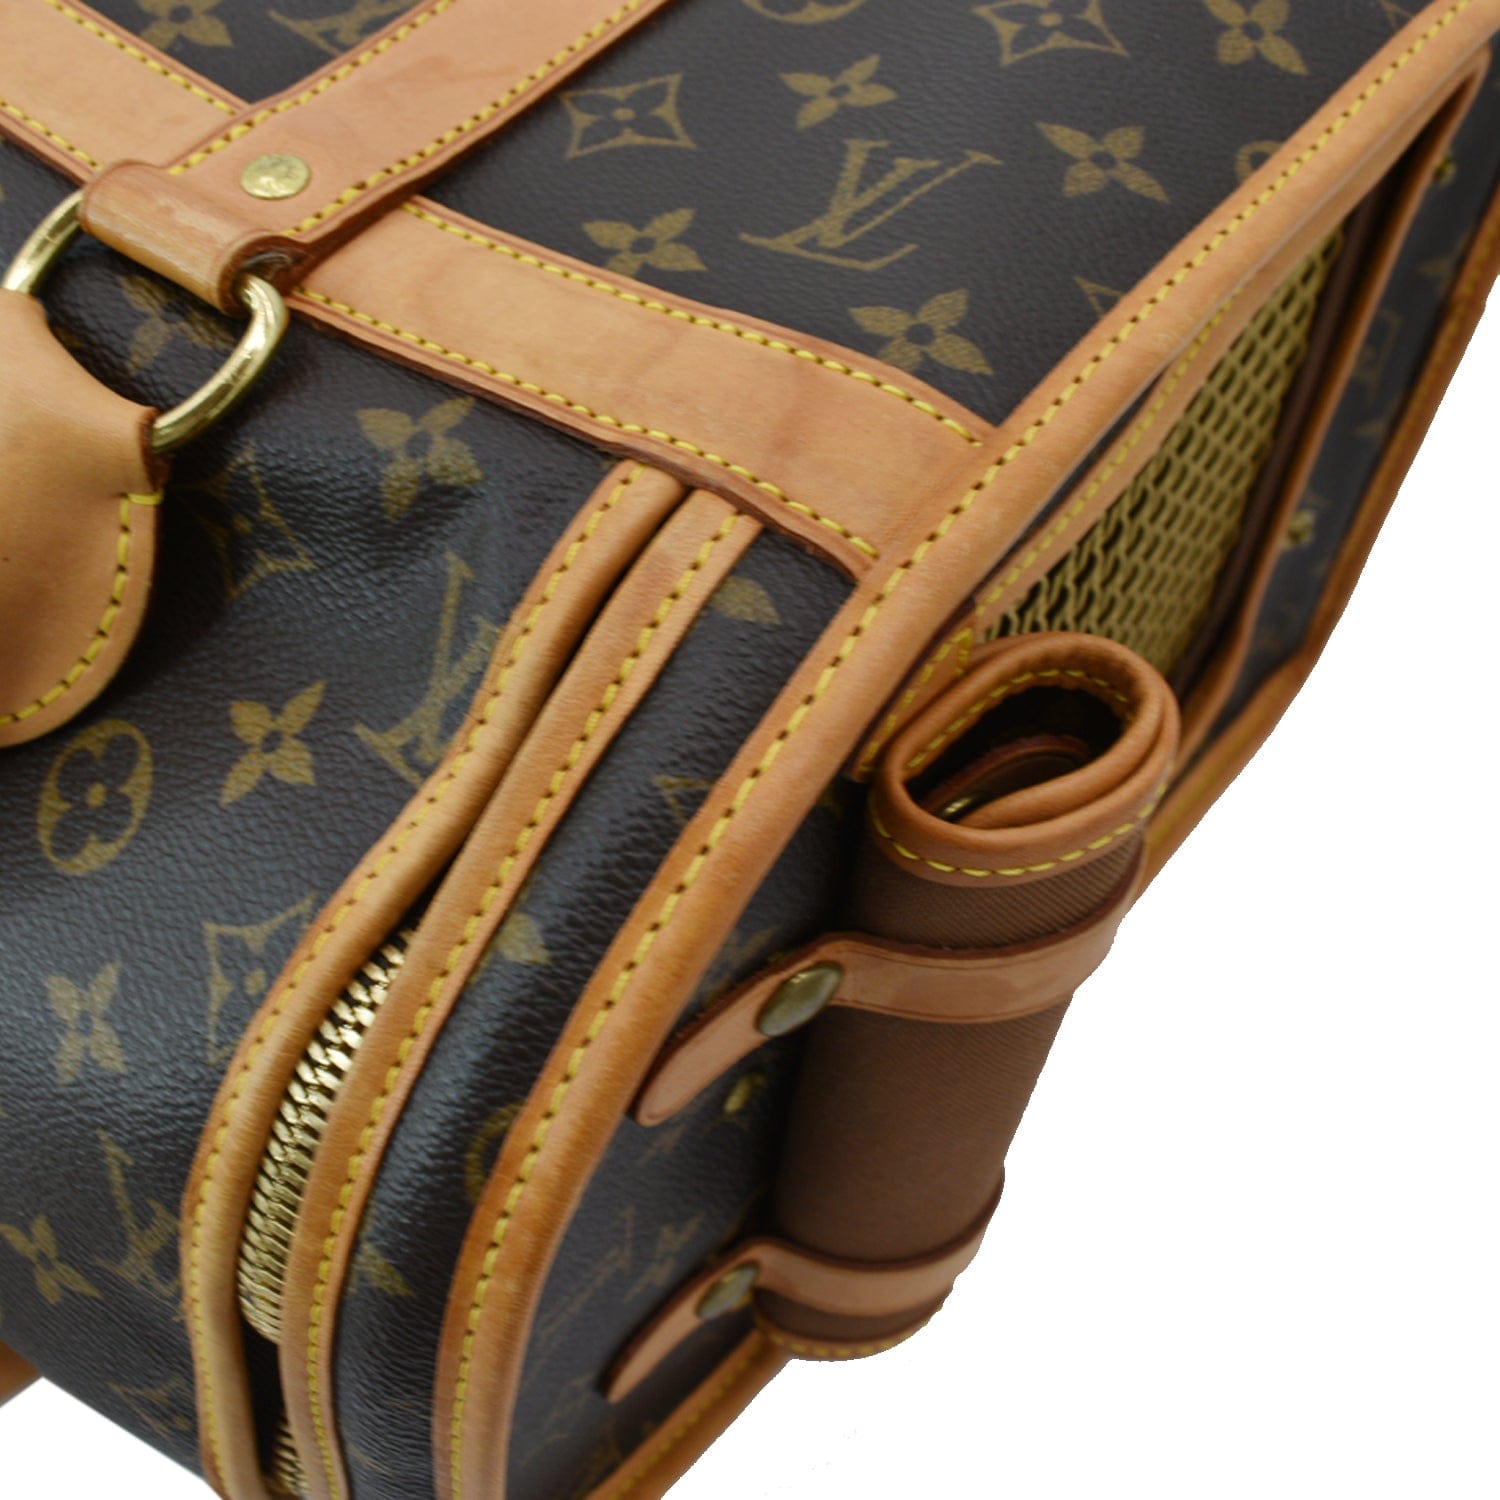 Louis Vuitton Dog Bag In Monogram Canvas And Leather